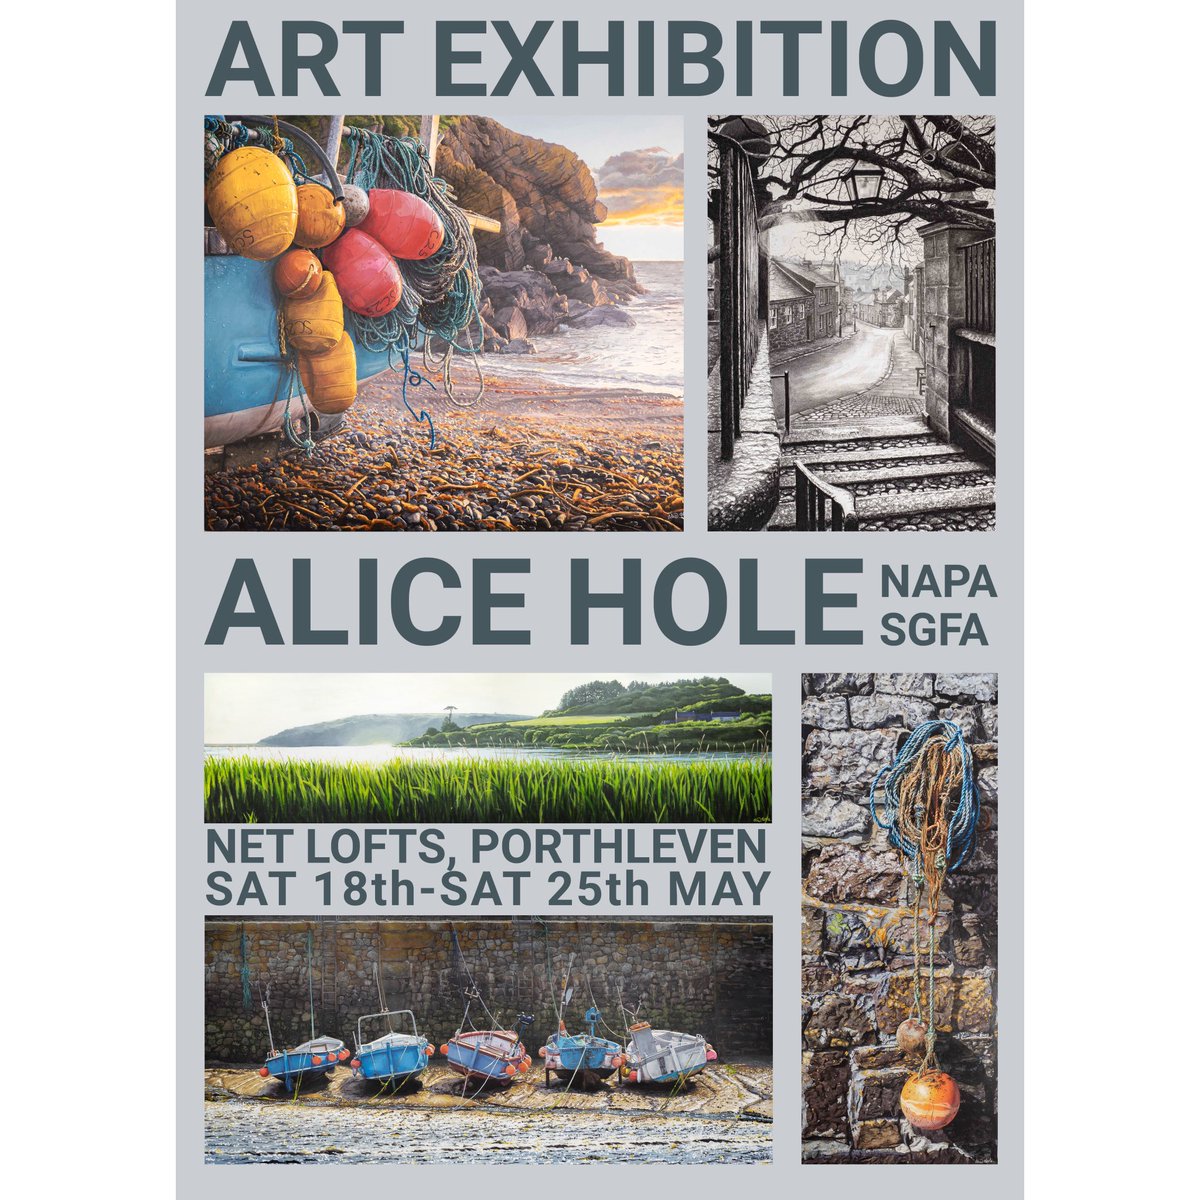 I’ve got my first ever solo exhibition in the Net Lofts in Porthleven starting this Saturday (18th May) for 1 week Come and see my work & chat art with me ☺️
#porthleven #artexhibition #aliceholeartist